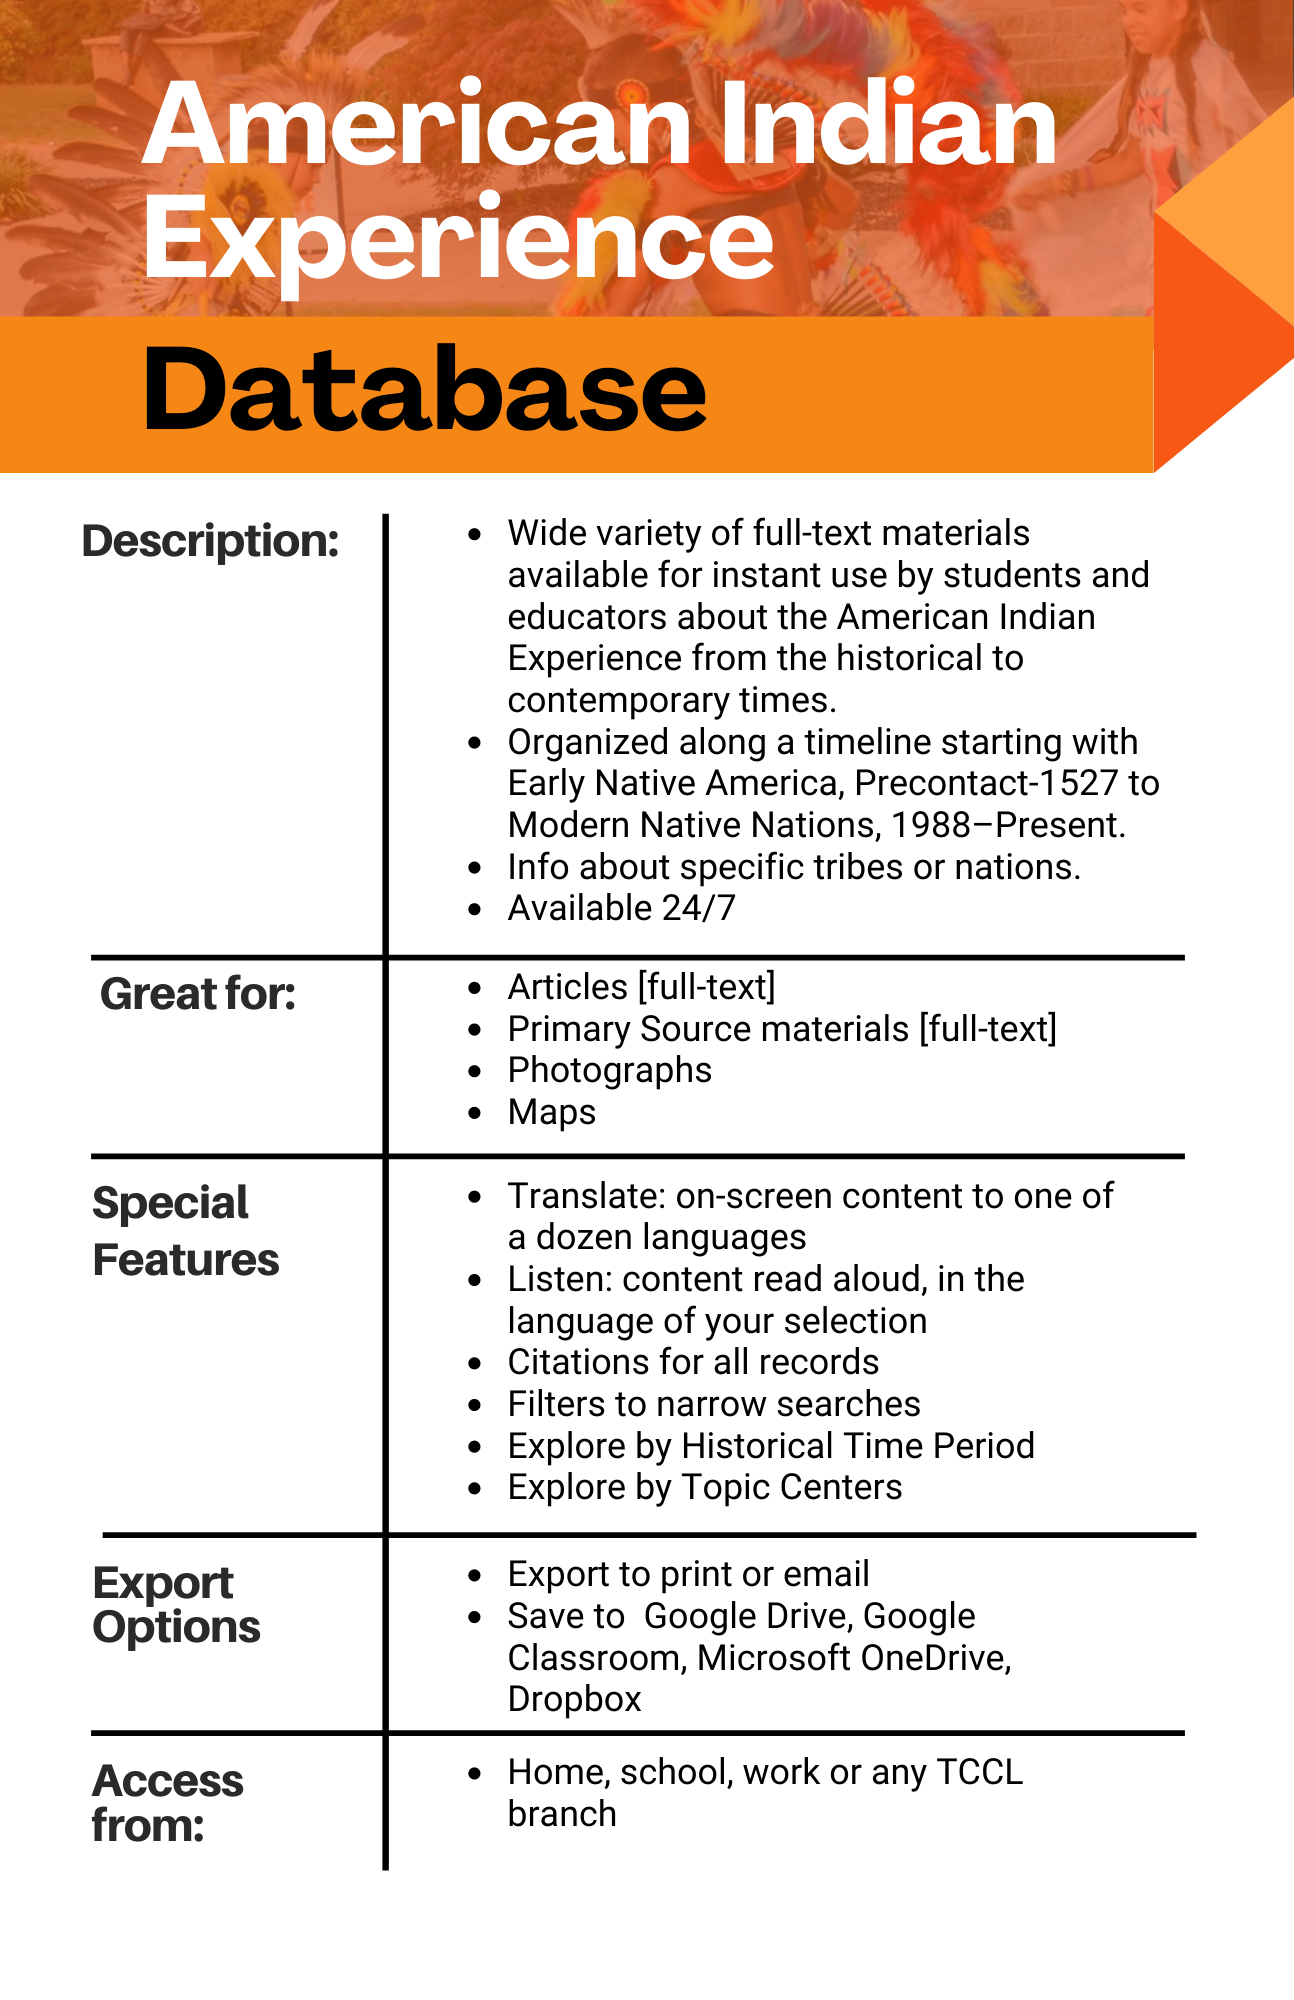 Description of services and resources available through the online database American Indian Experience